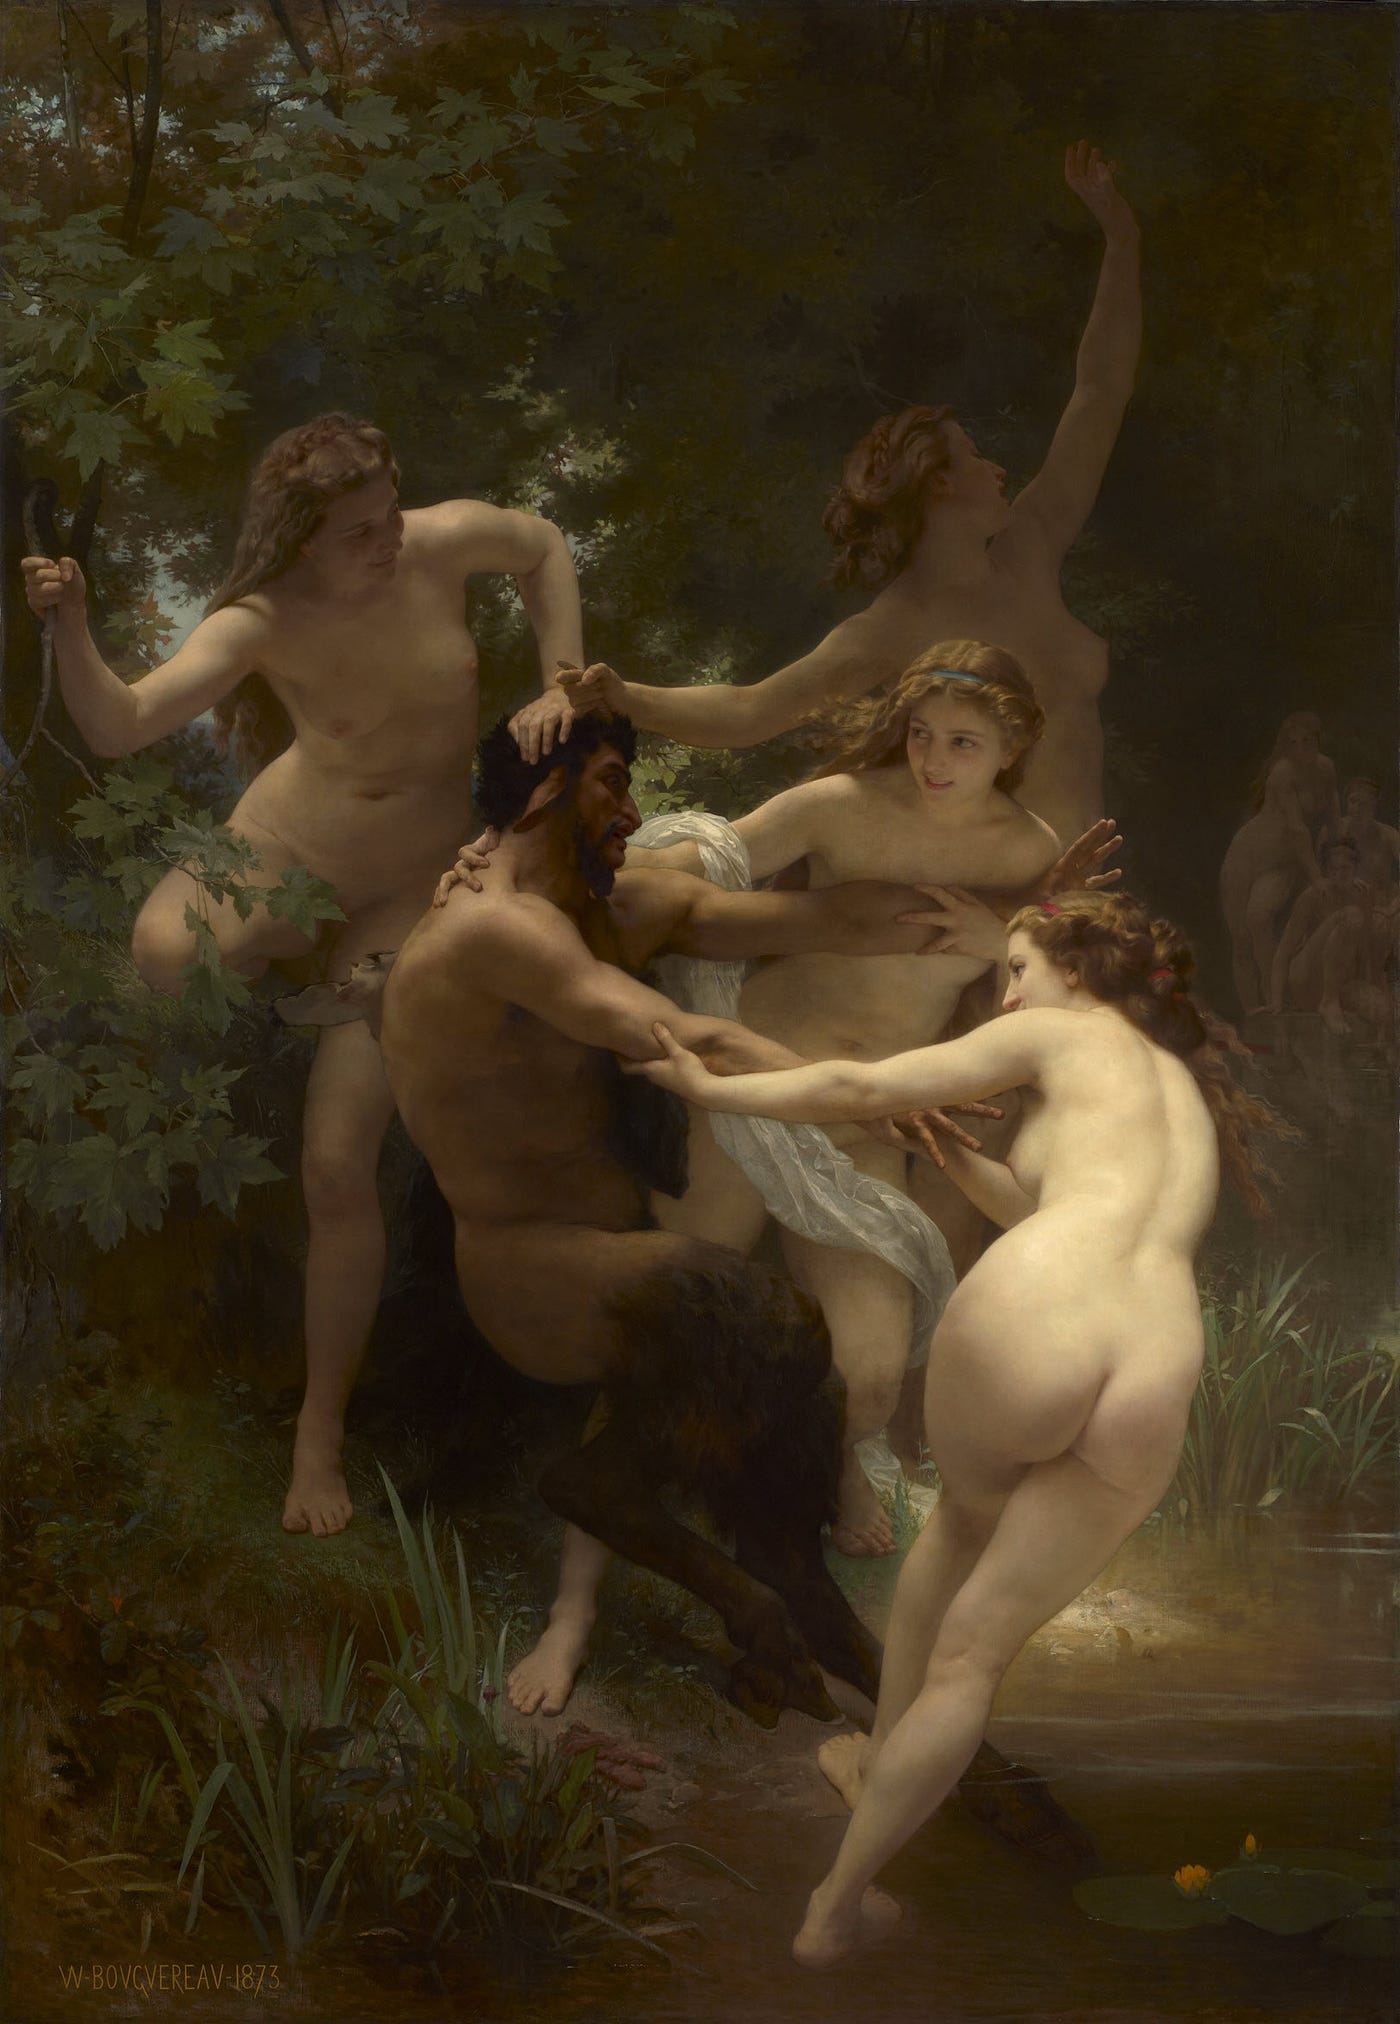 The Nymphs and Satyrs of William-Adolphe Bouguereau by Remy Dean Signifier Medium pic